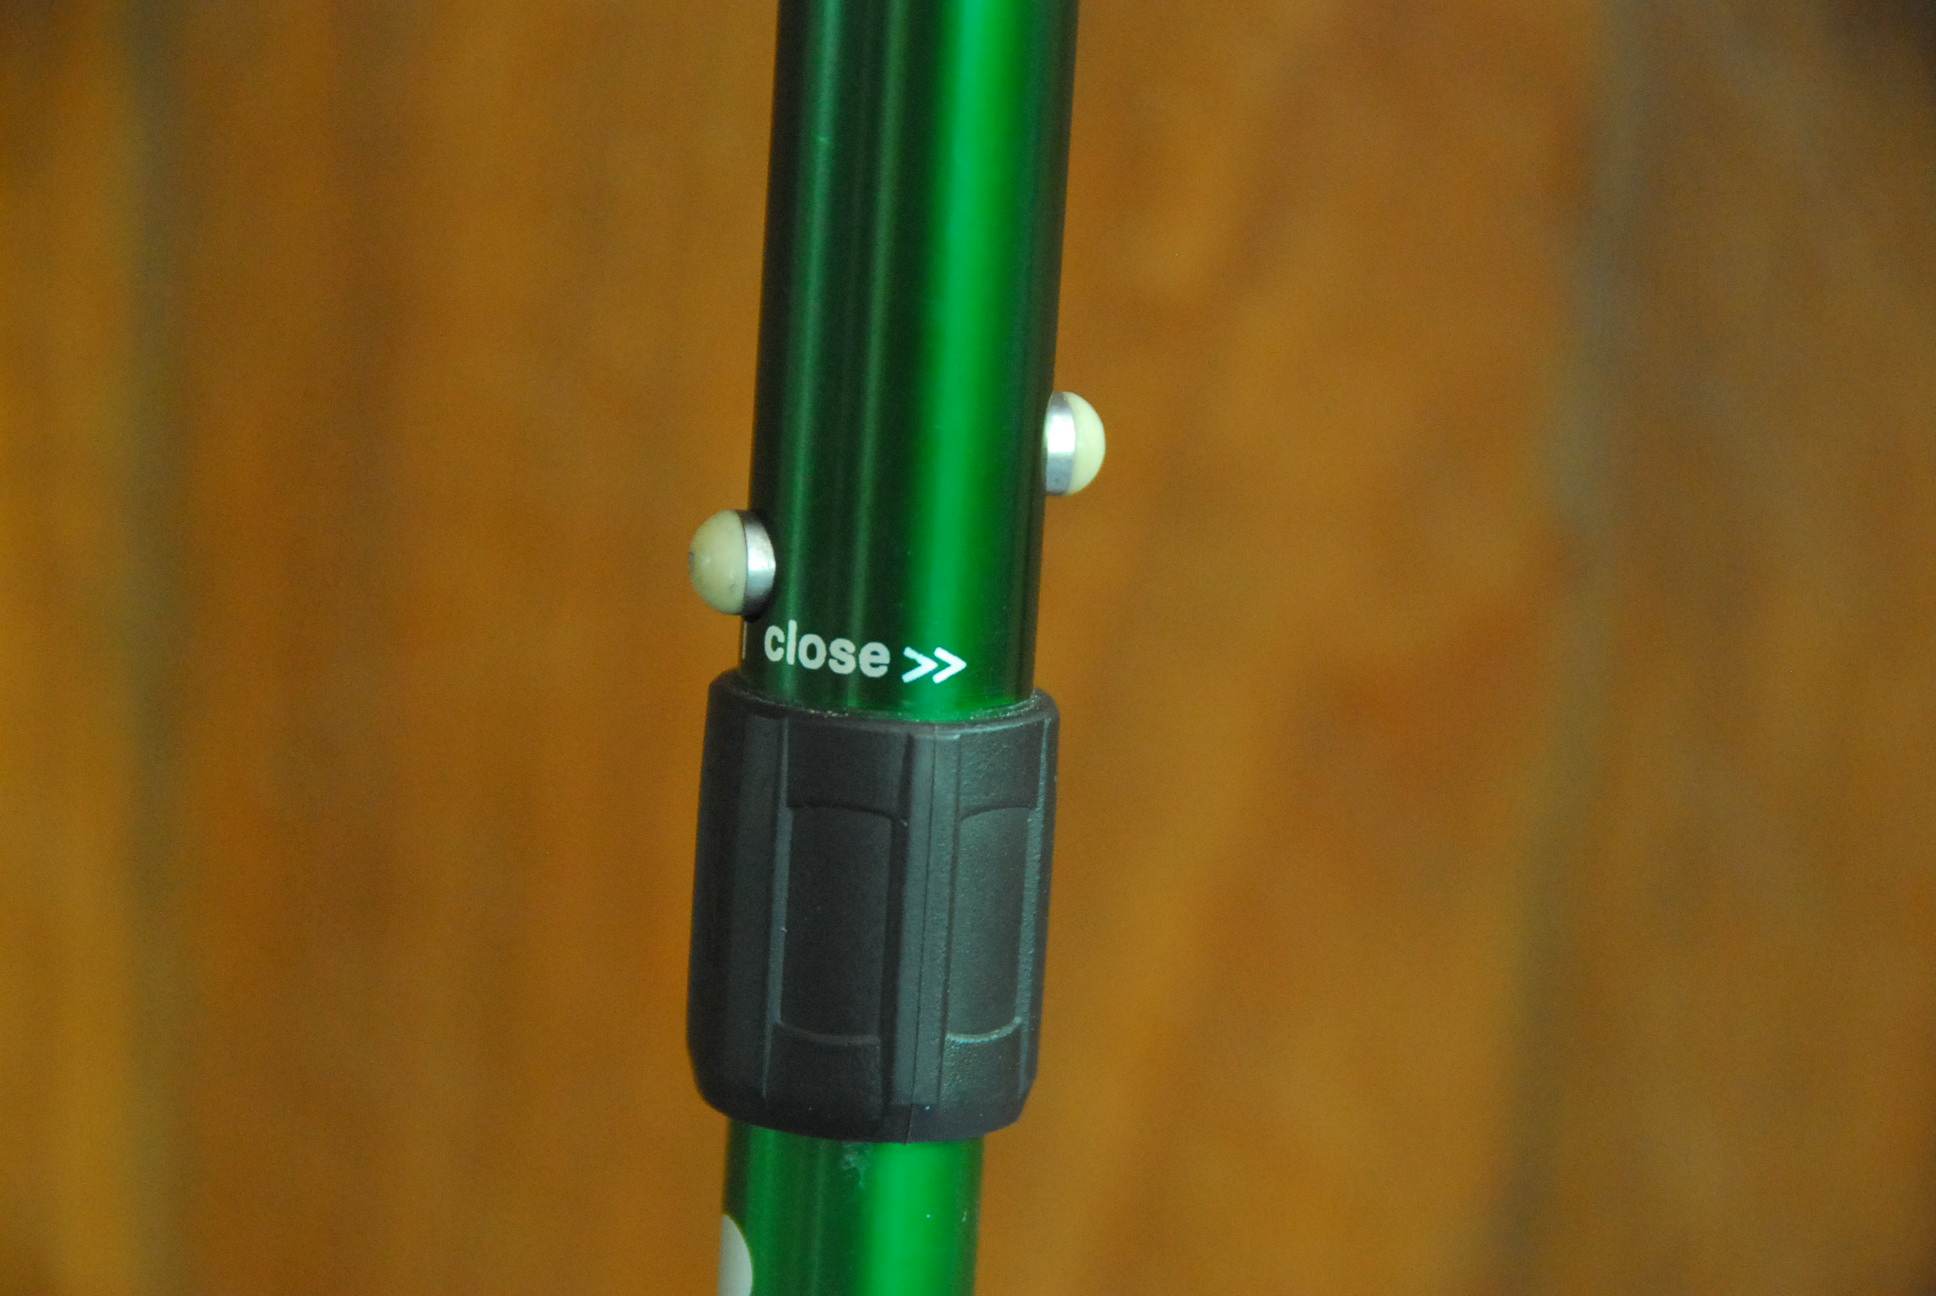 The click lock system of the bottom pole